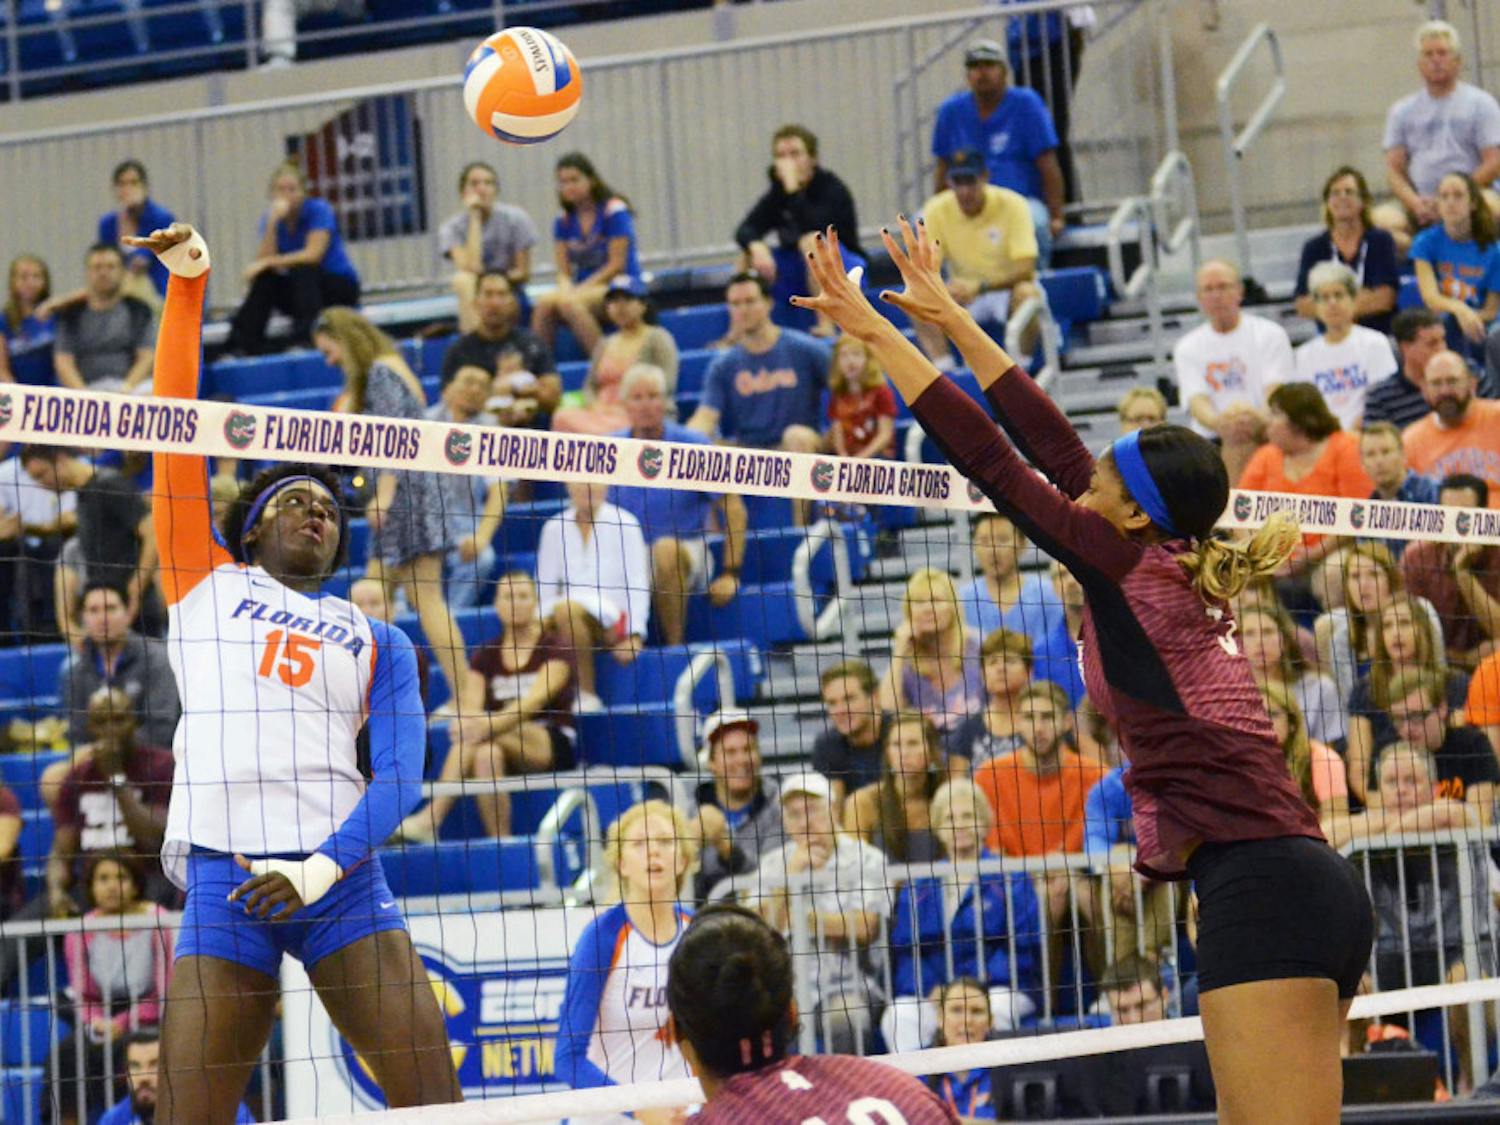 UF's Shainah Joseph swings for a kill attempt against Mississippi State. The sophomore middle blocker recorded seven kills and five blocks as No. 8 seed Florida defeated ninth-seed Illinois in the third round of the NCAA Tournament on Friday in Ames, Iowa.